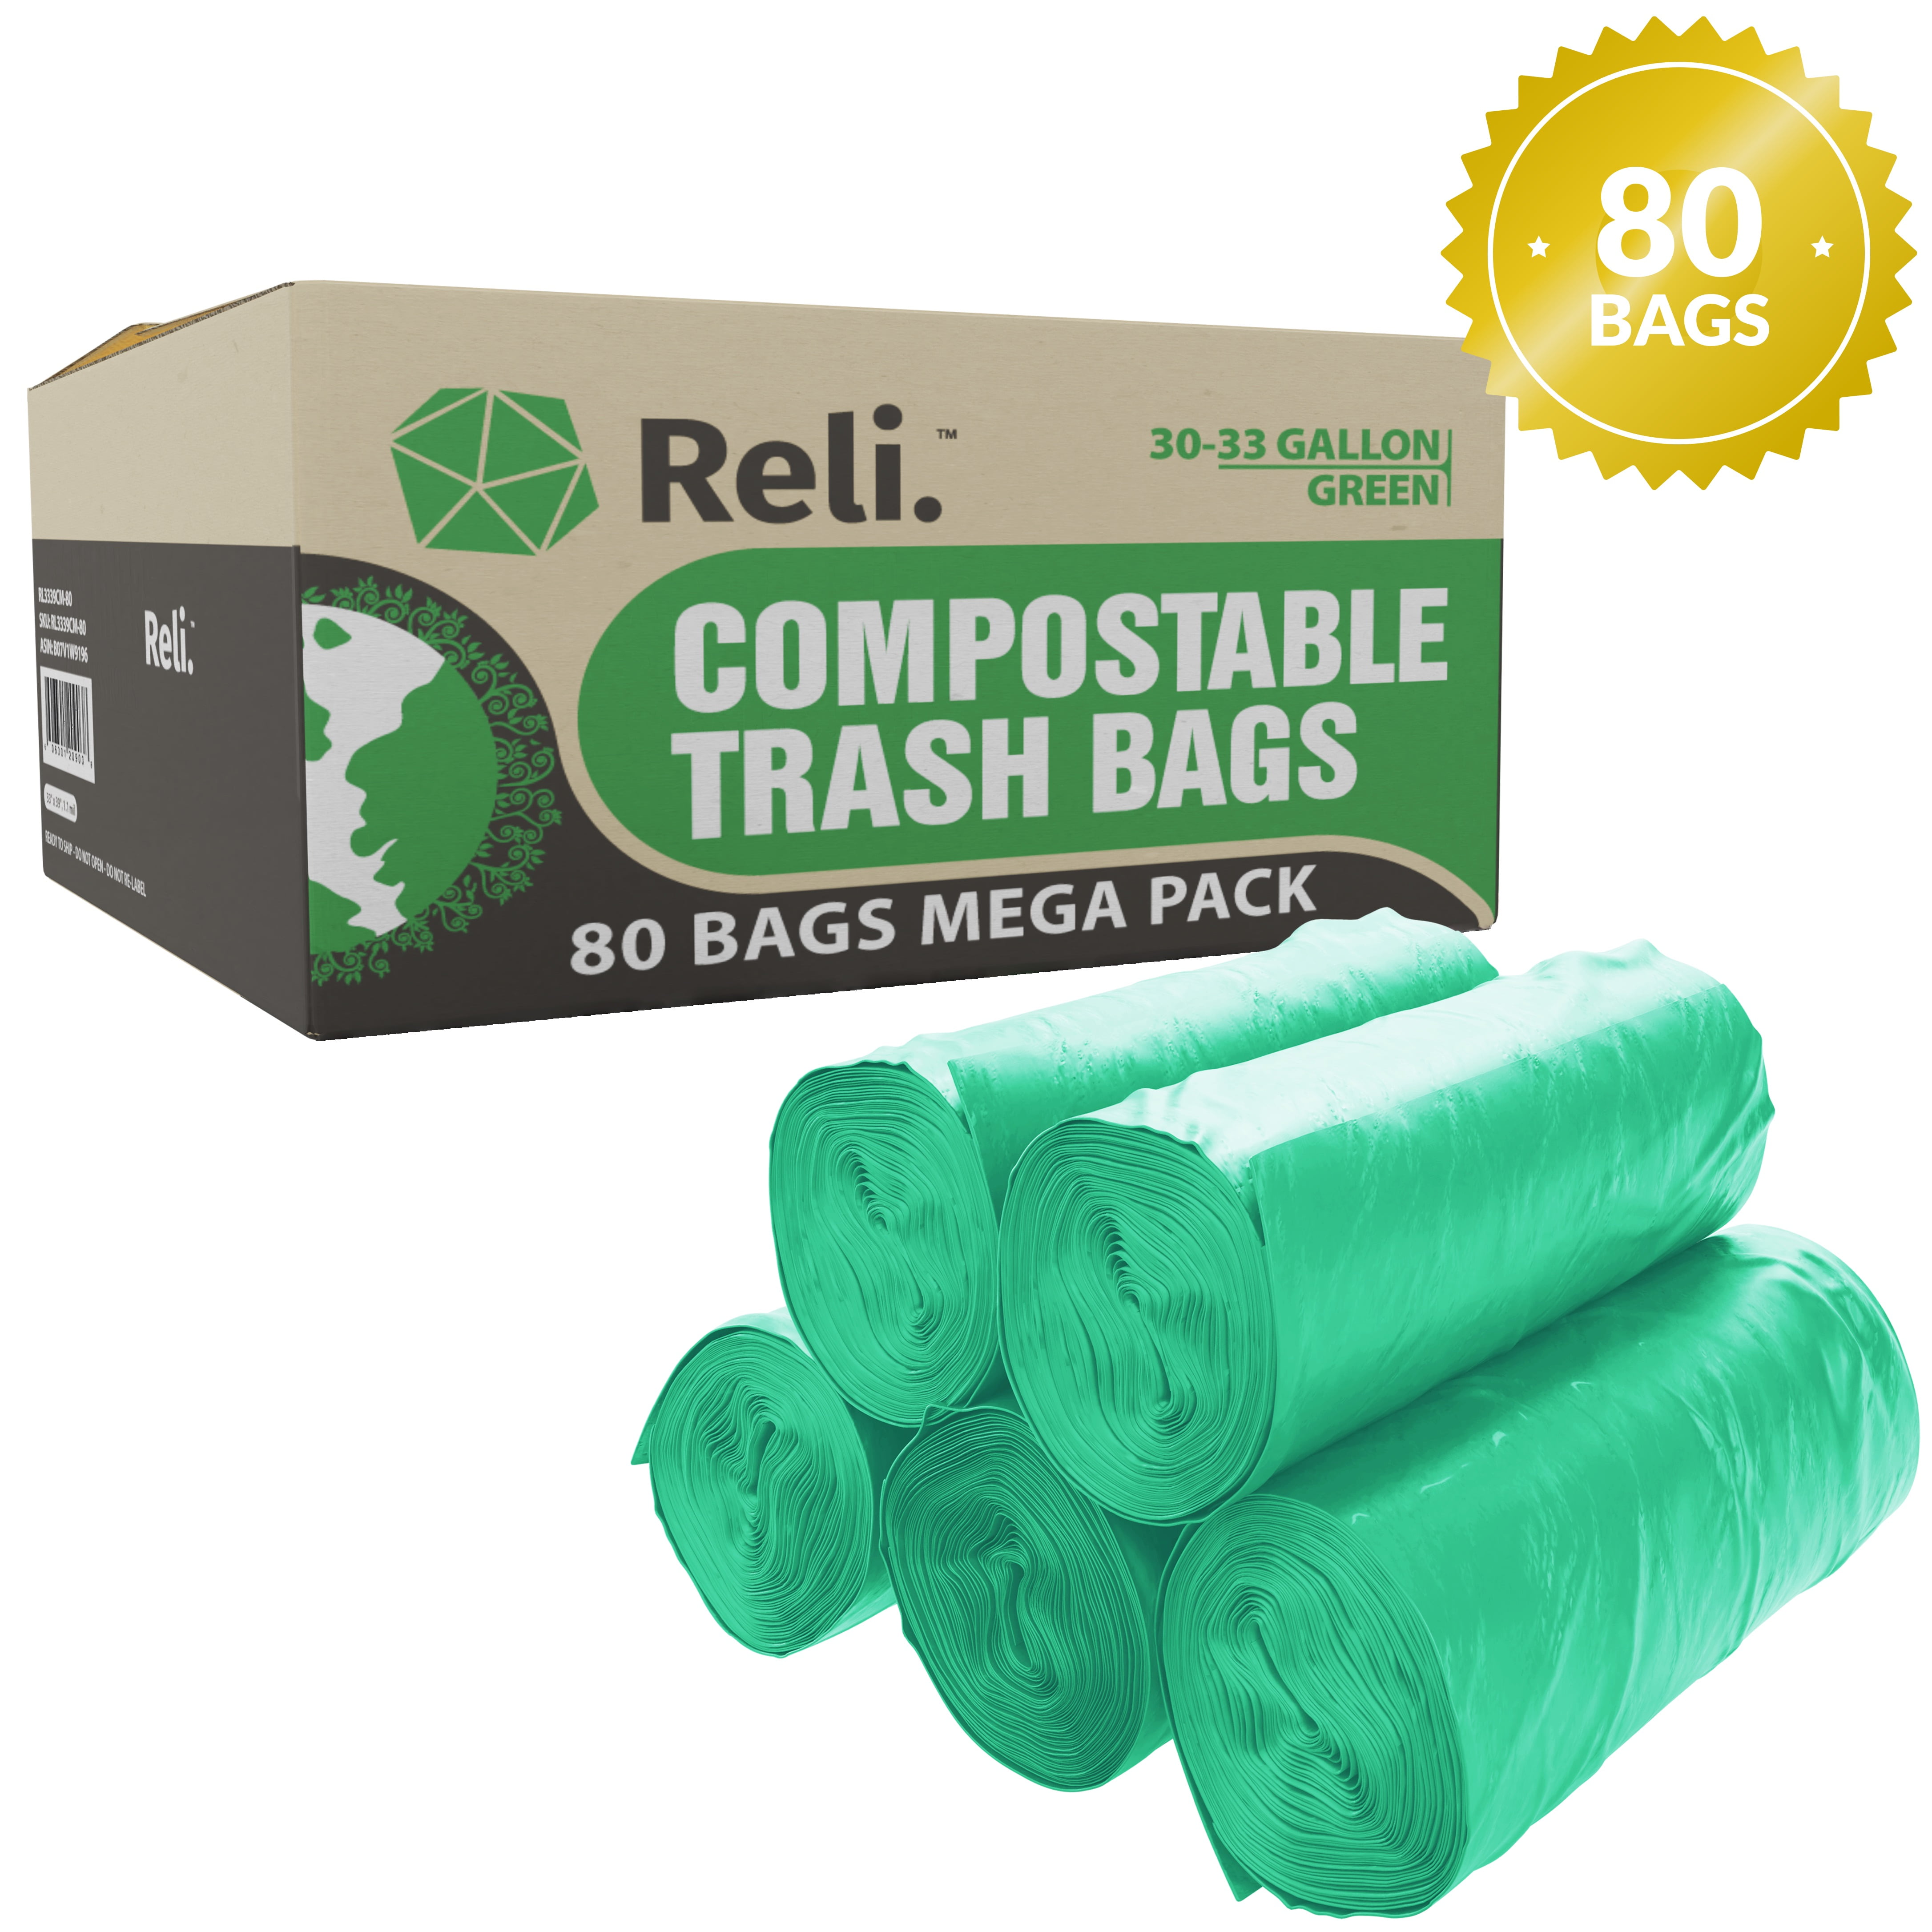 13-15 Gallon Biodegradable Trash Bags Recycled Garbage Details about   Compostable Trash Bags 